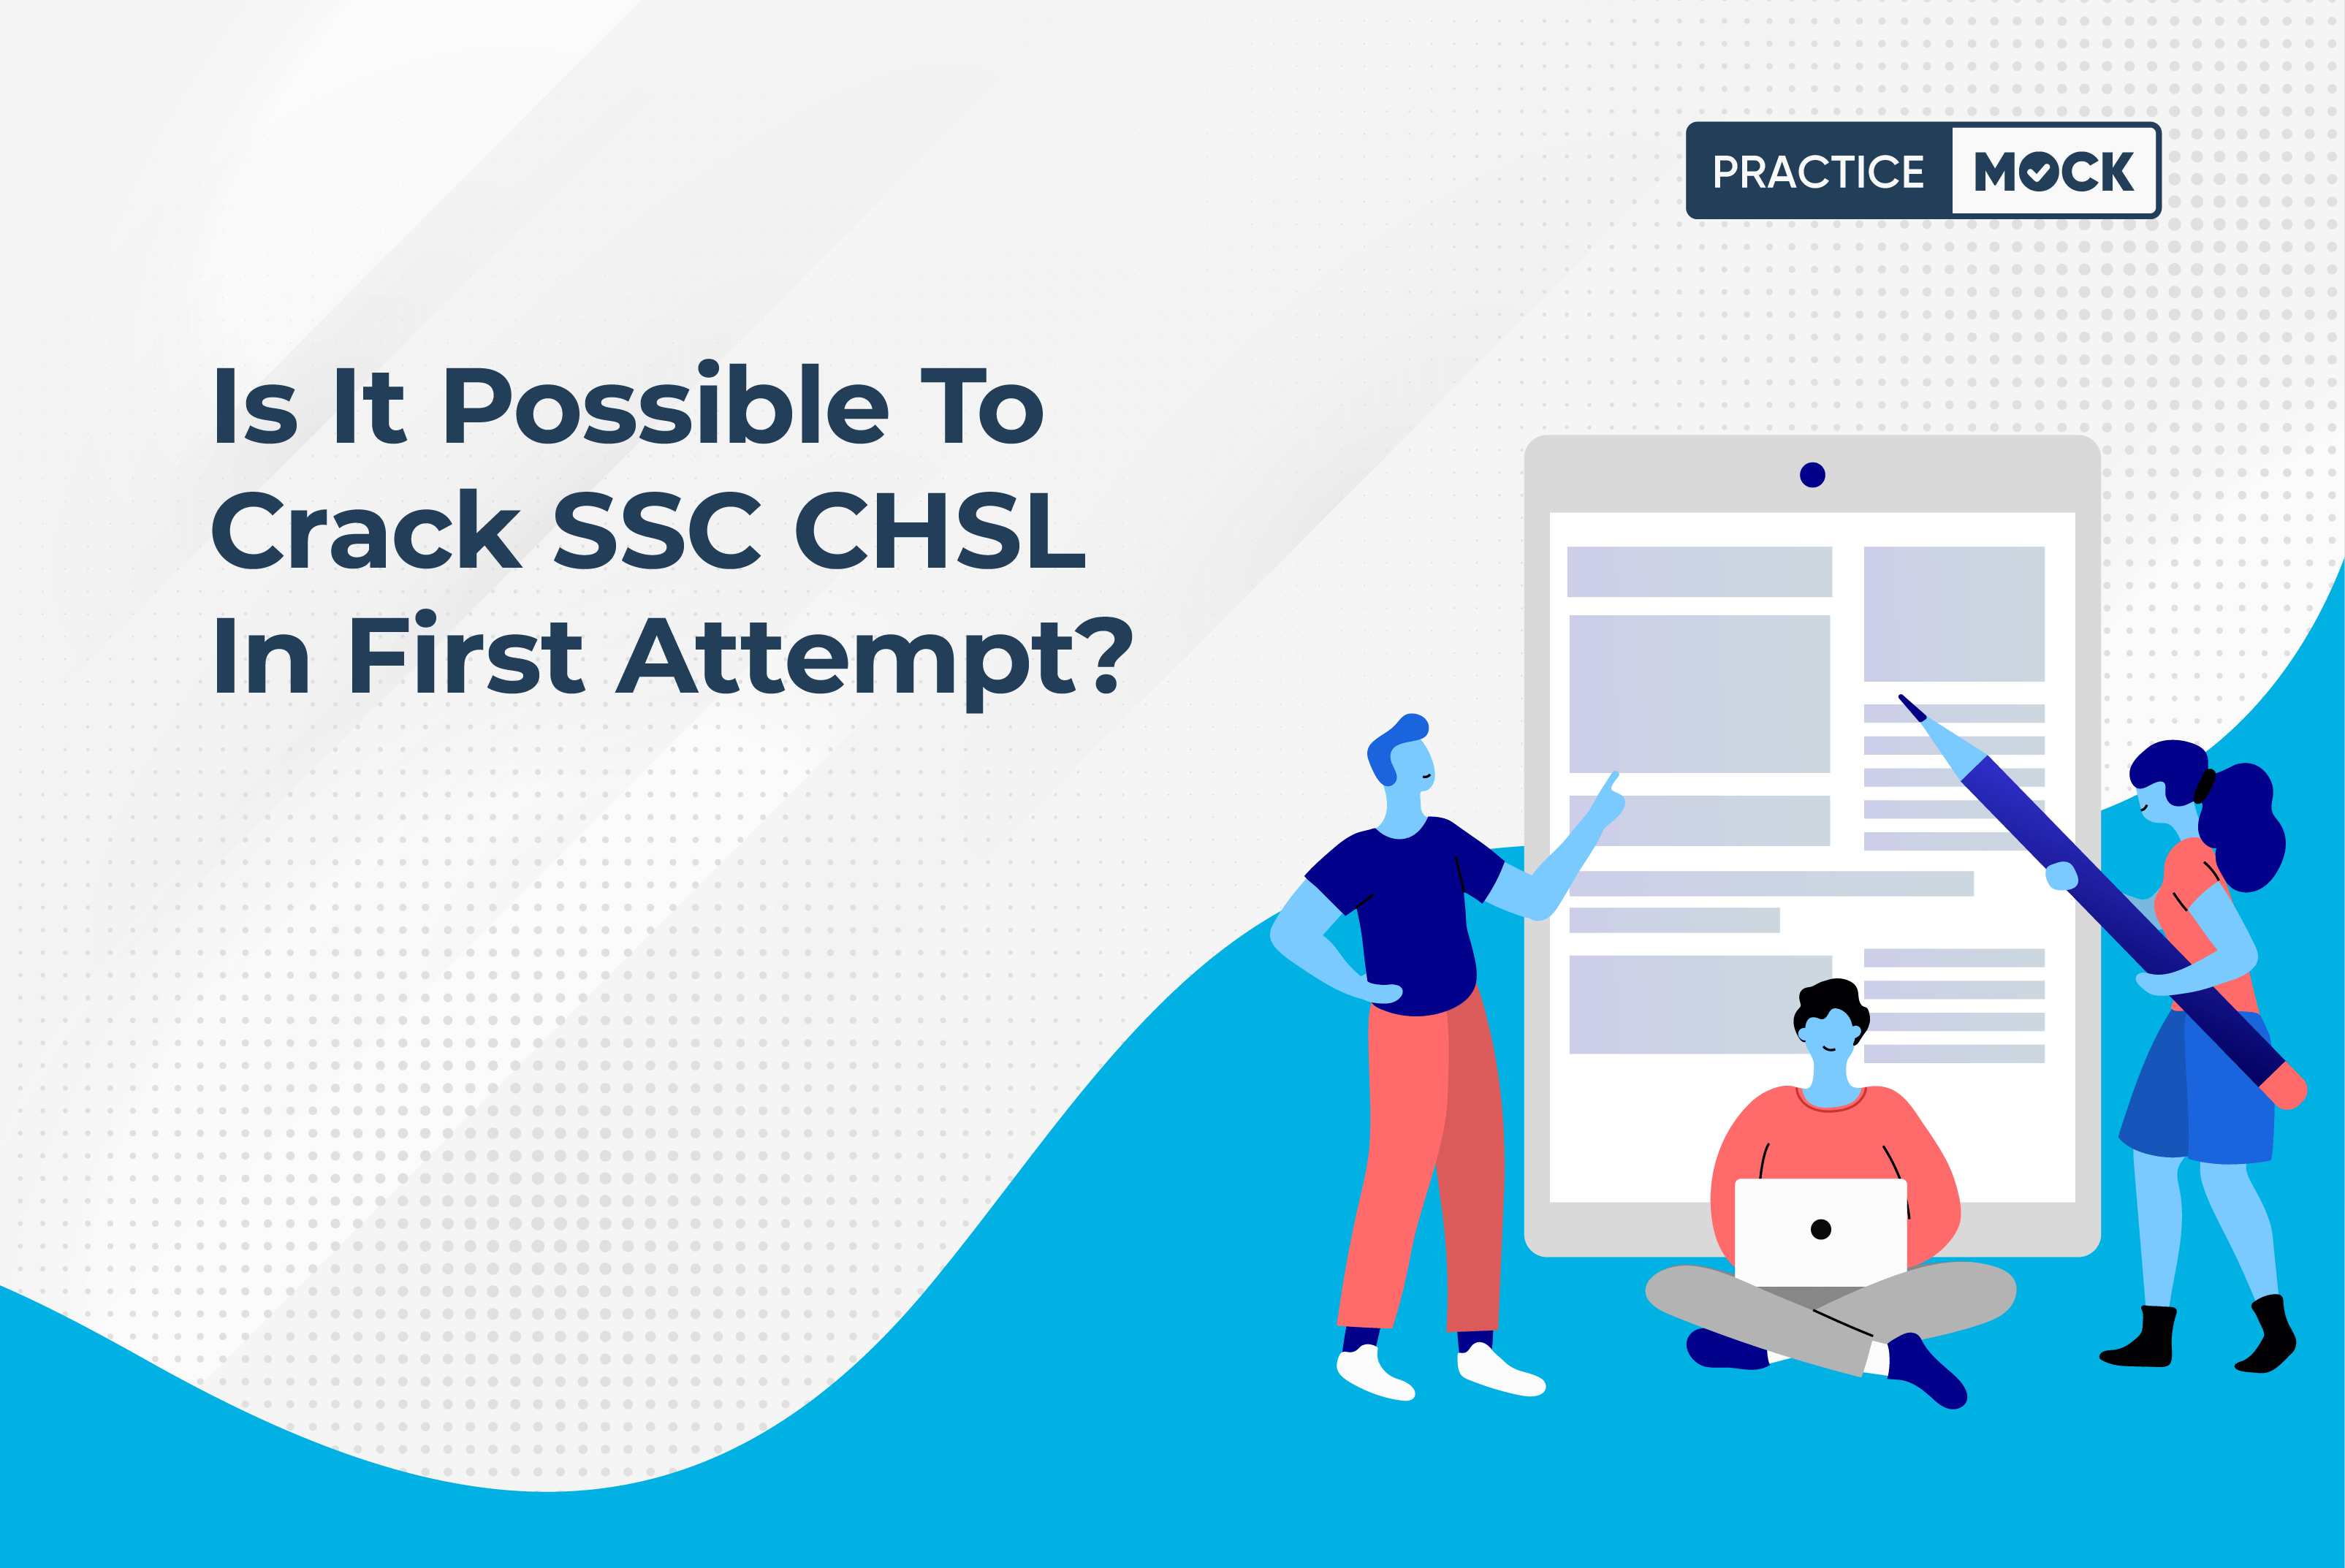 Is it possible to crack SSC CHSL without any coaching?